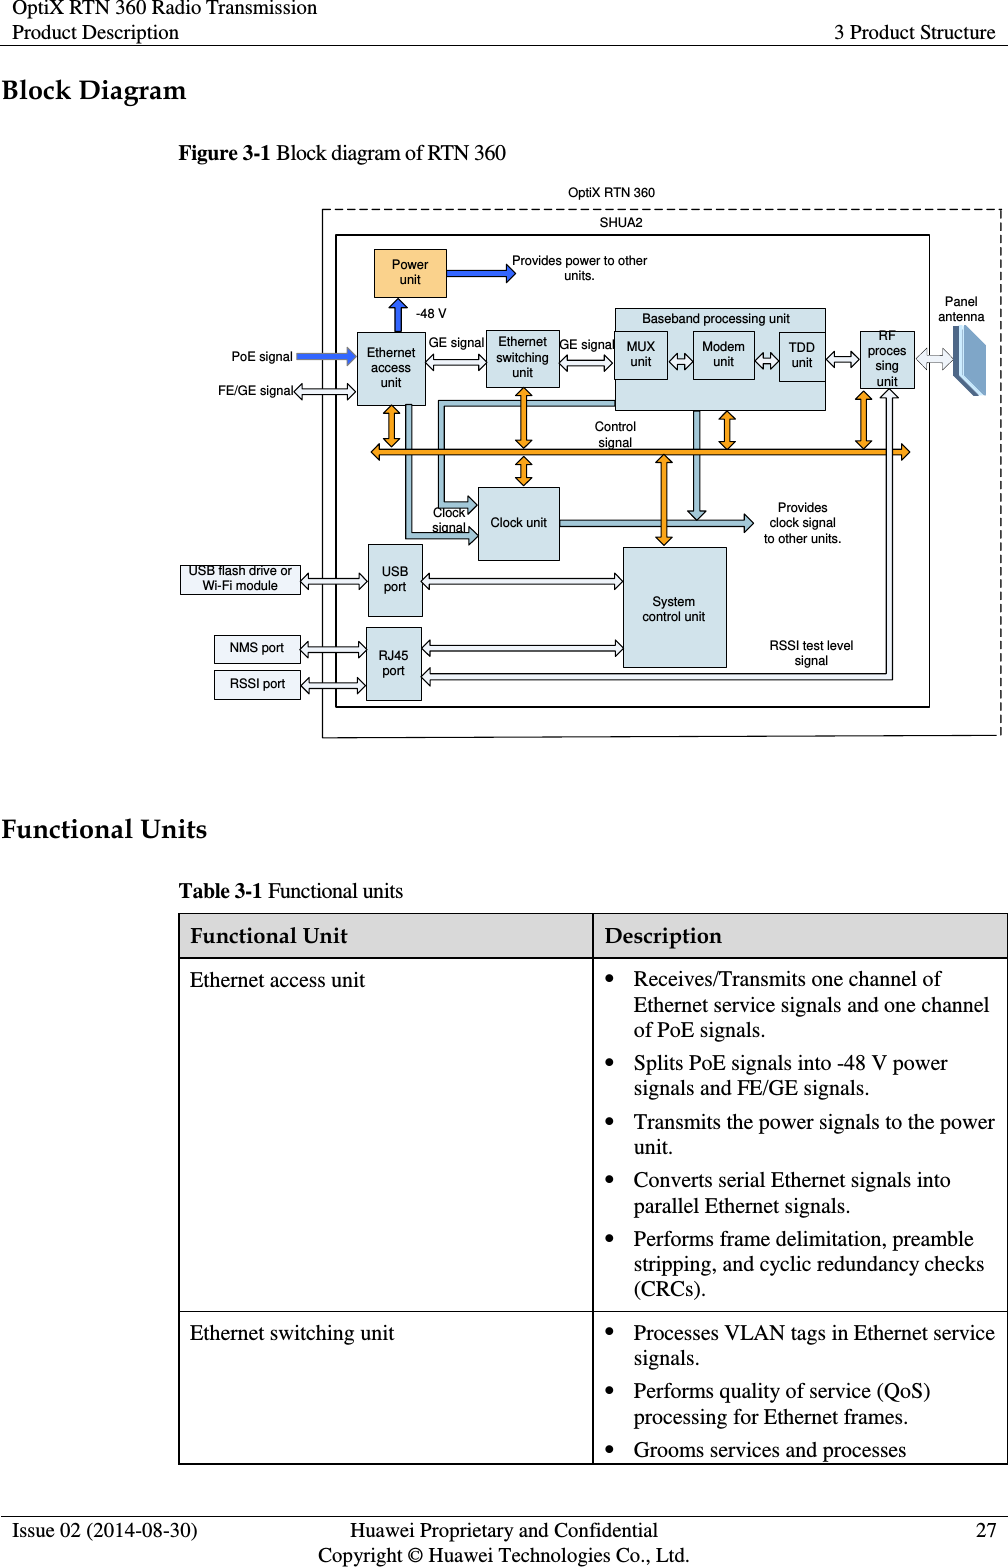 OptiX RTN 360 Radio Transmission Product Description 3 Product Structure  Issue 02 (2014-08-30) Huawei Proprietary and Confidential                                     Copyright © Huawei Technologies Co., Ltd. 27  Block Diagram Figure 3-1 Block diagram of RTN 360 USB flash drive or Wi-Fi module System control unitPower unitClock unit Provides clock signal to other units.Panel antennaEthernet switching unitEthernet access unitRF processing unitClock signalPoE signalProvides power to other units.SHUA2MUX unit Modem unitBaseband processing unitControl signalRSSI portRSSI test level signalOptiX RTN 360NMS portGE signal GE signalUSB port-48 VRJ45 portTDD unitFE/GE signal  Functional Units Table 3-1 Functional units Functional Unit Description Ethernet access unit  Receives/Transmits one channel of Ethernet service signals and one channel of PoE signals.  Splits PoE signals into -48 V power signals and FE/GE signals.  Transmits the power signals to the power unit.    Converts serial Ethernet signals into parallel Ethernet signals.    Performs frame delimitation, preamble stripping, and cyclic redundancy checks (CRCs). Ethernet switching unit  Processes VLAN tags in Ethernet service signals.  Performs quality of service (QoS) processing for Ethernet frames.  Grooms services and processes 